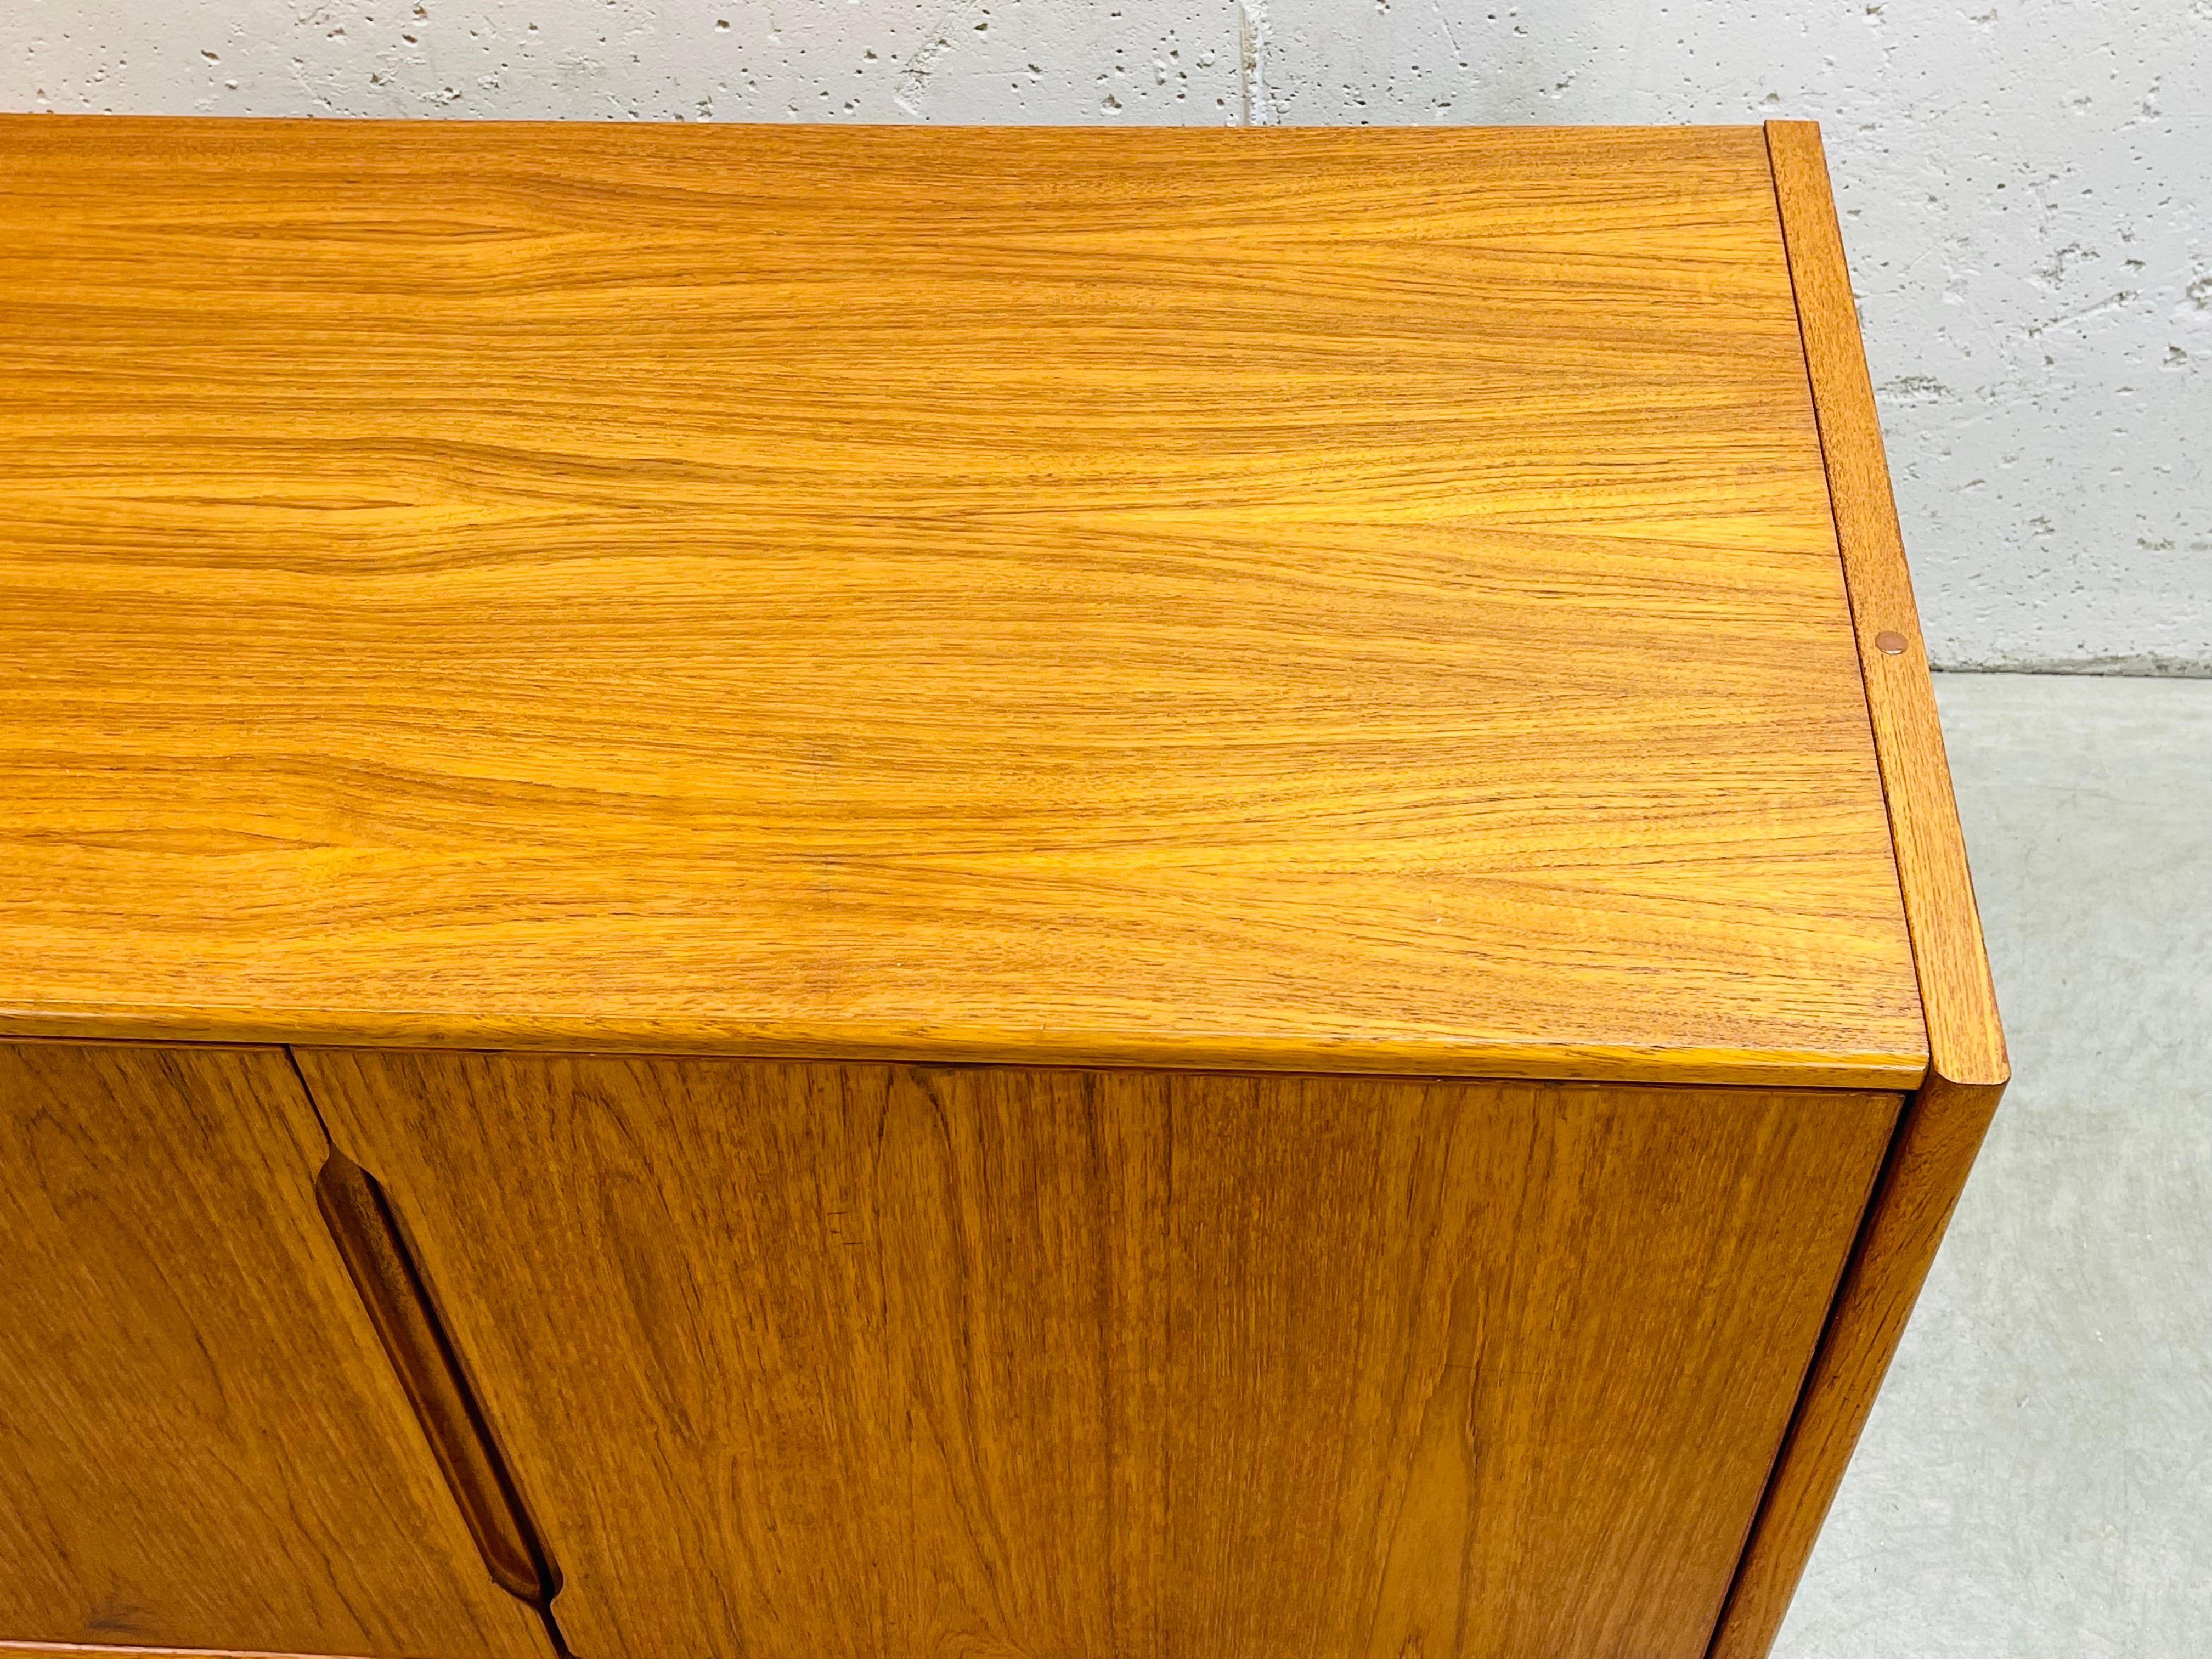 1970s Danish Teak Wood Storage Cabinet In Good Condition For Sale In Amherst, NH